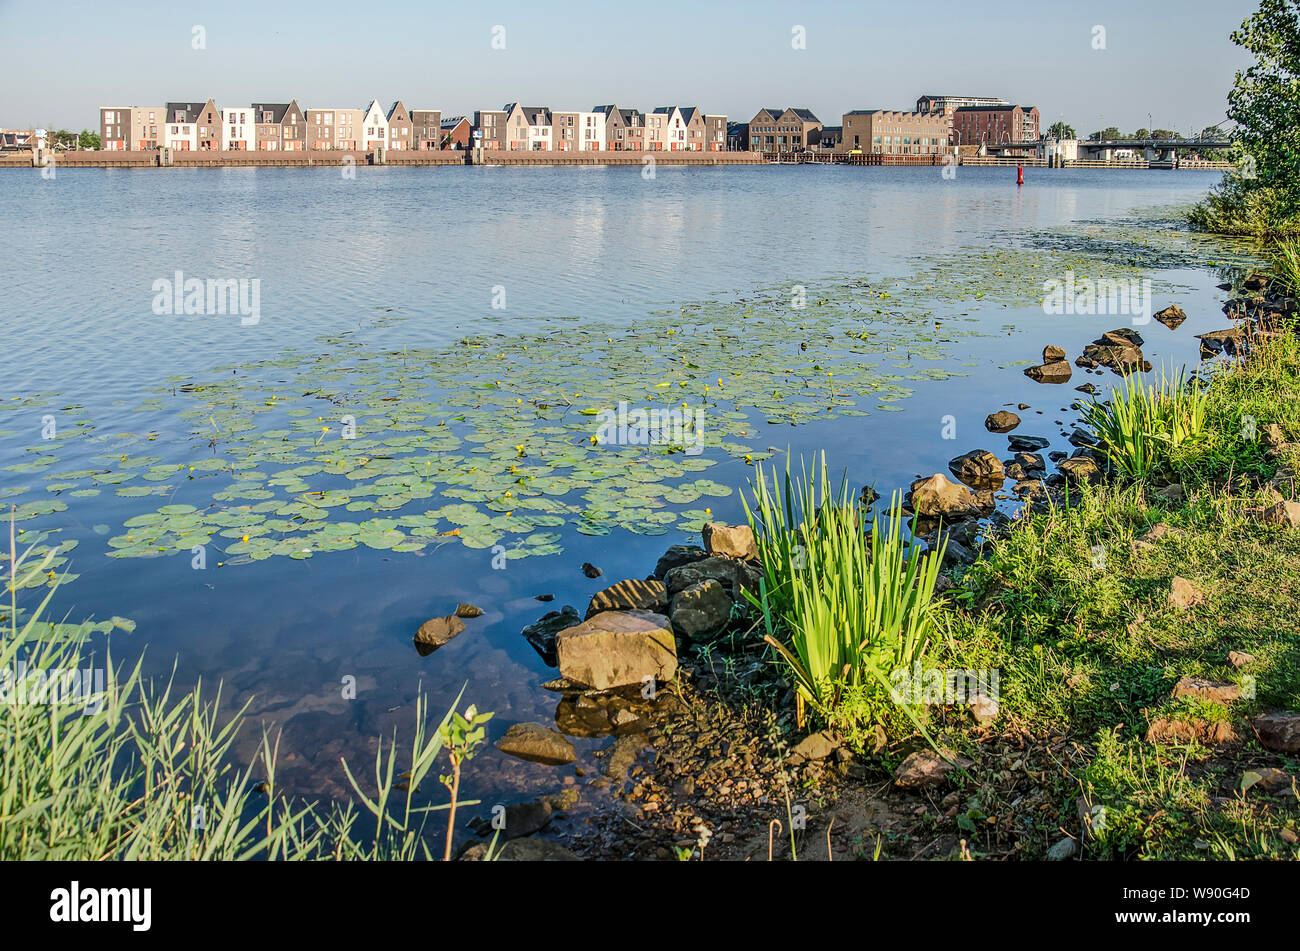 Zwolle, The Netherlands, July 30, 2019: view from the bank of the river Zwarte Water with grass, rocks and water lilies towards the new Stadshagen dis Stock Photo